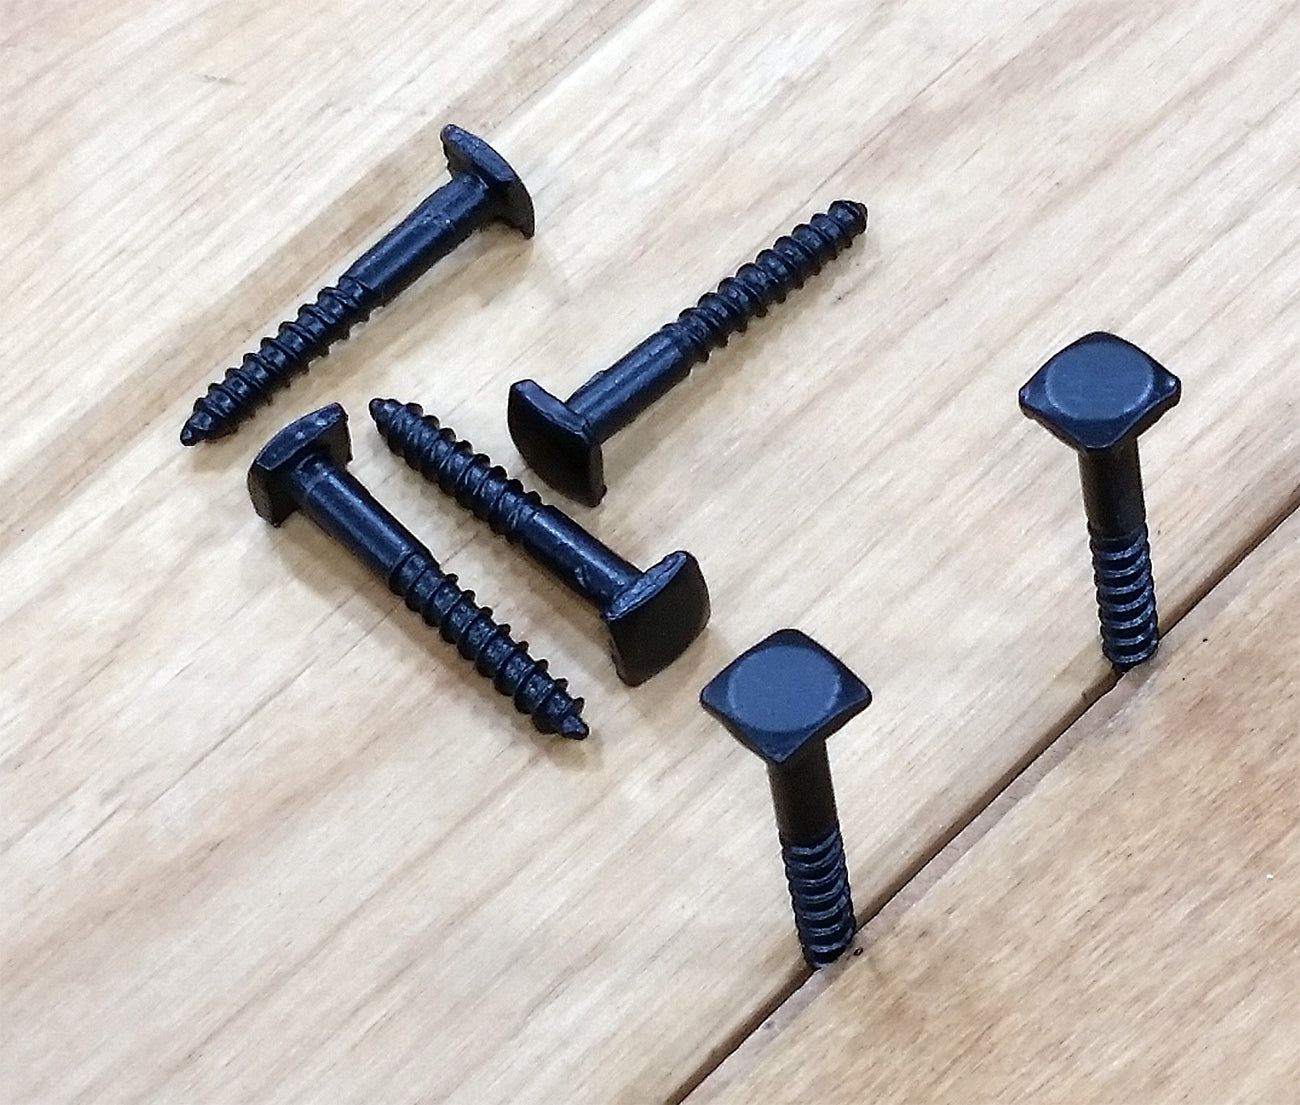 What Are Square Head Bolts Used For?